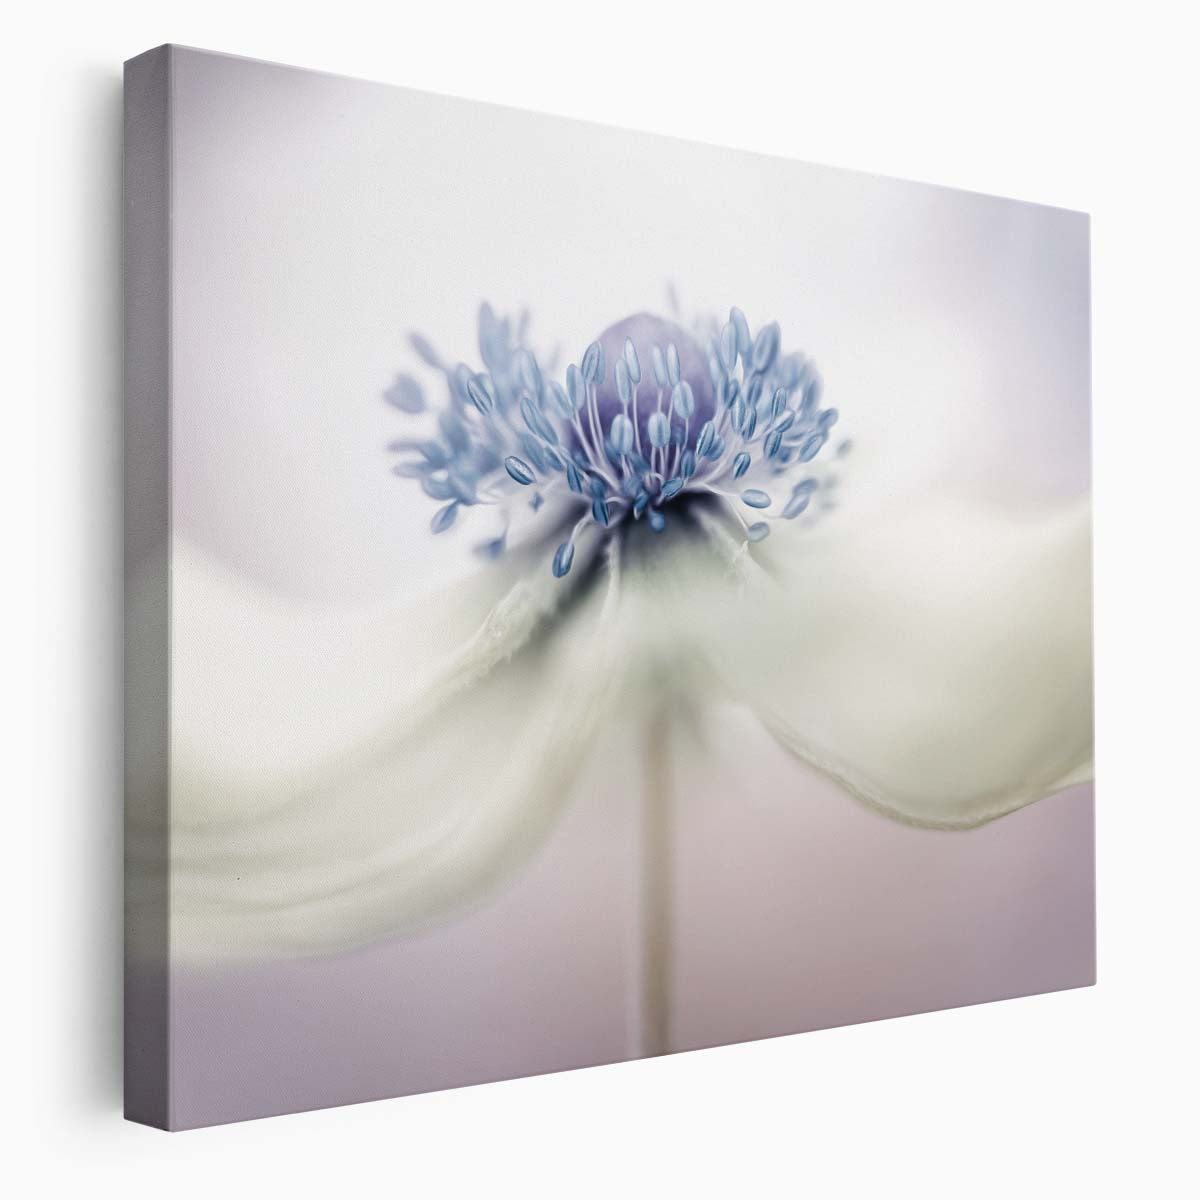 Japanese Anemone Macro Floral Bokeh Wall Art by Luxuriance Designs. Made in USA.